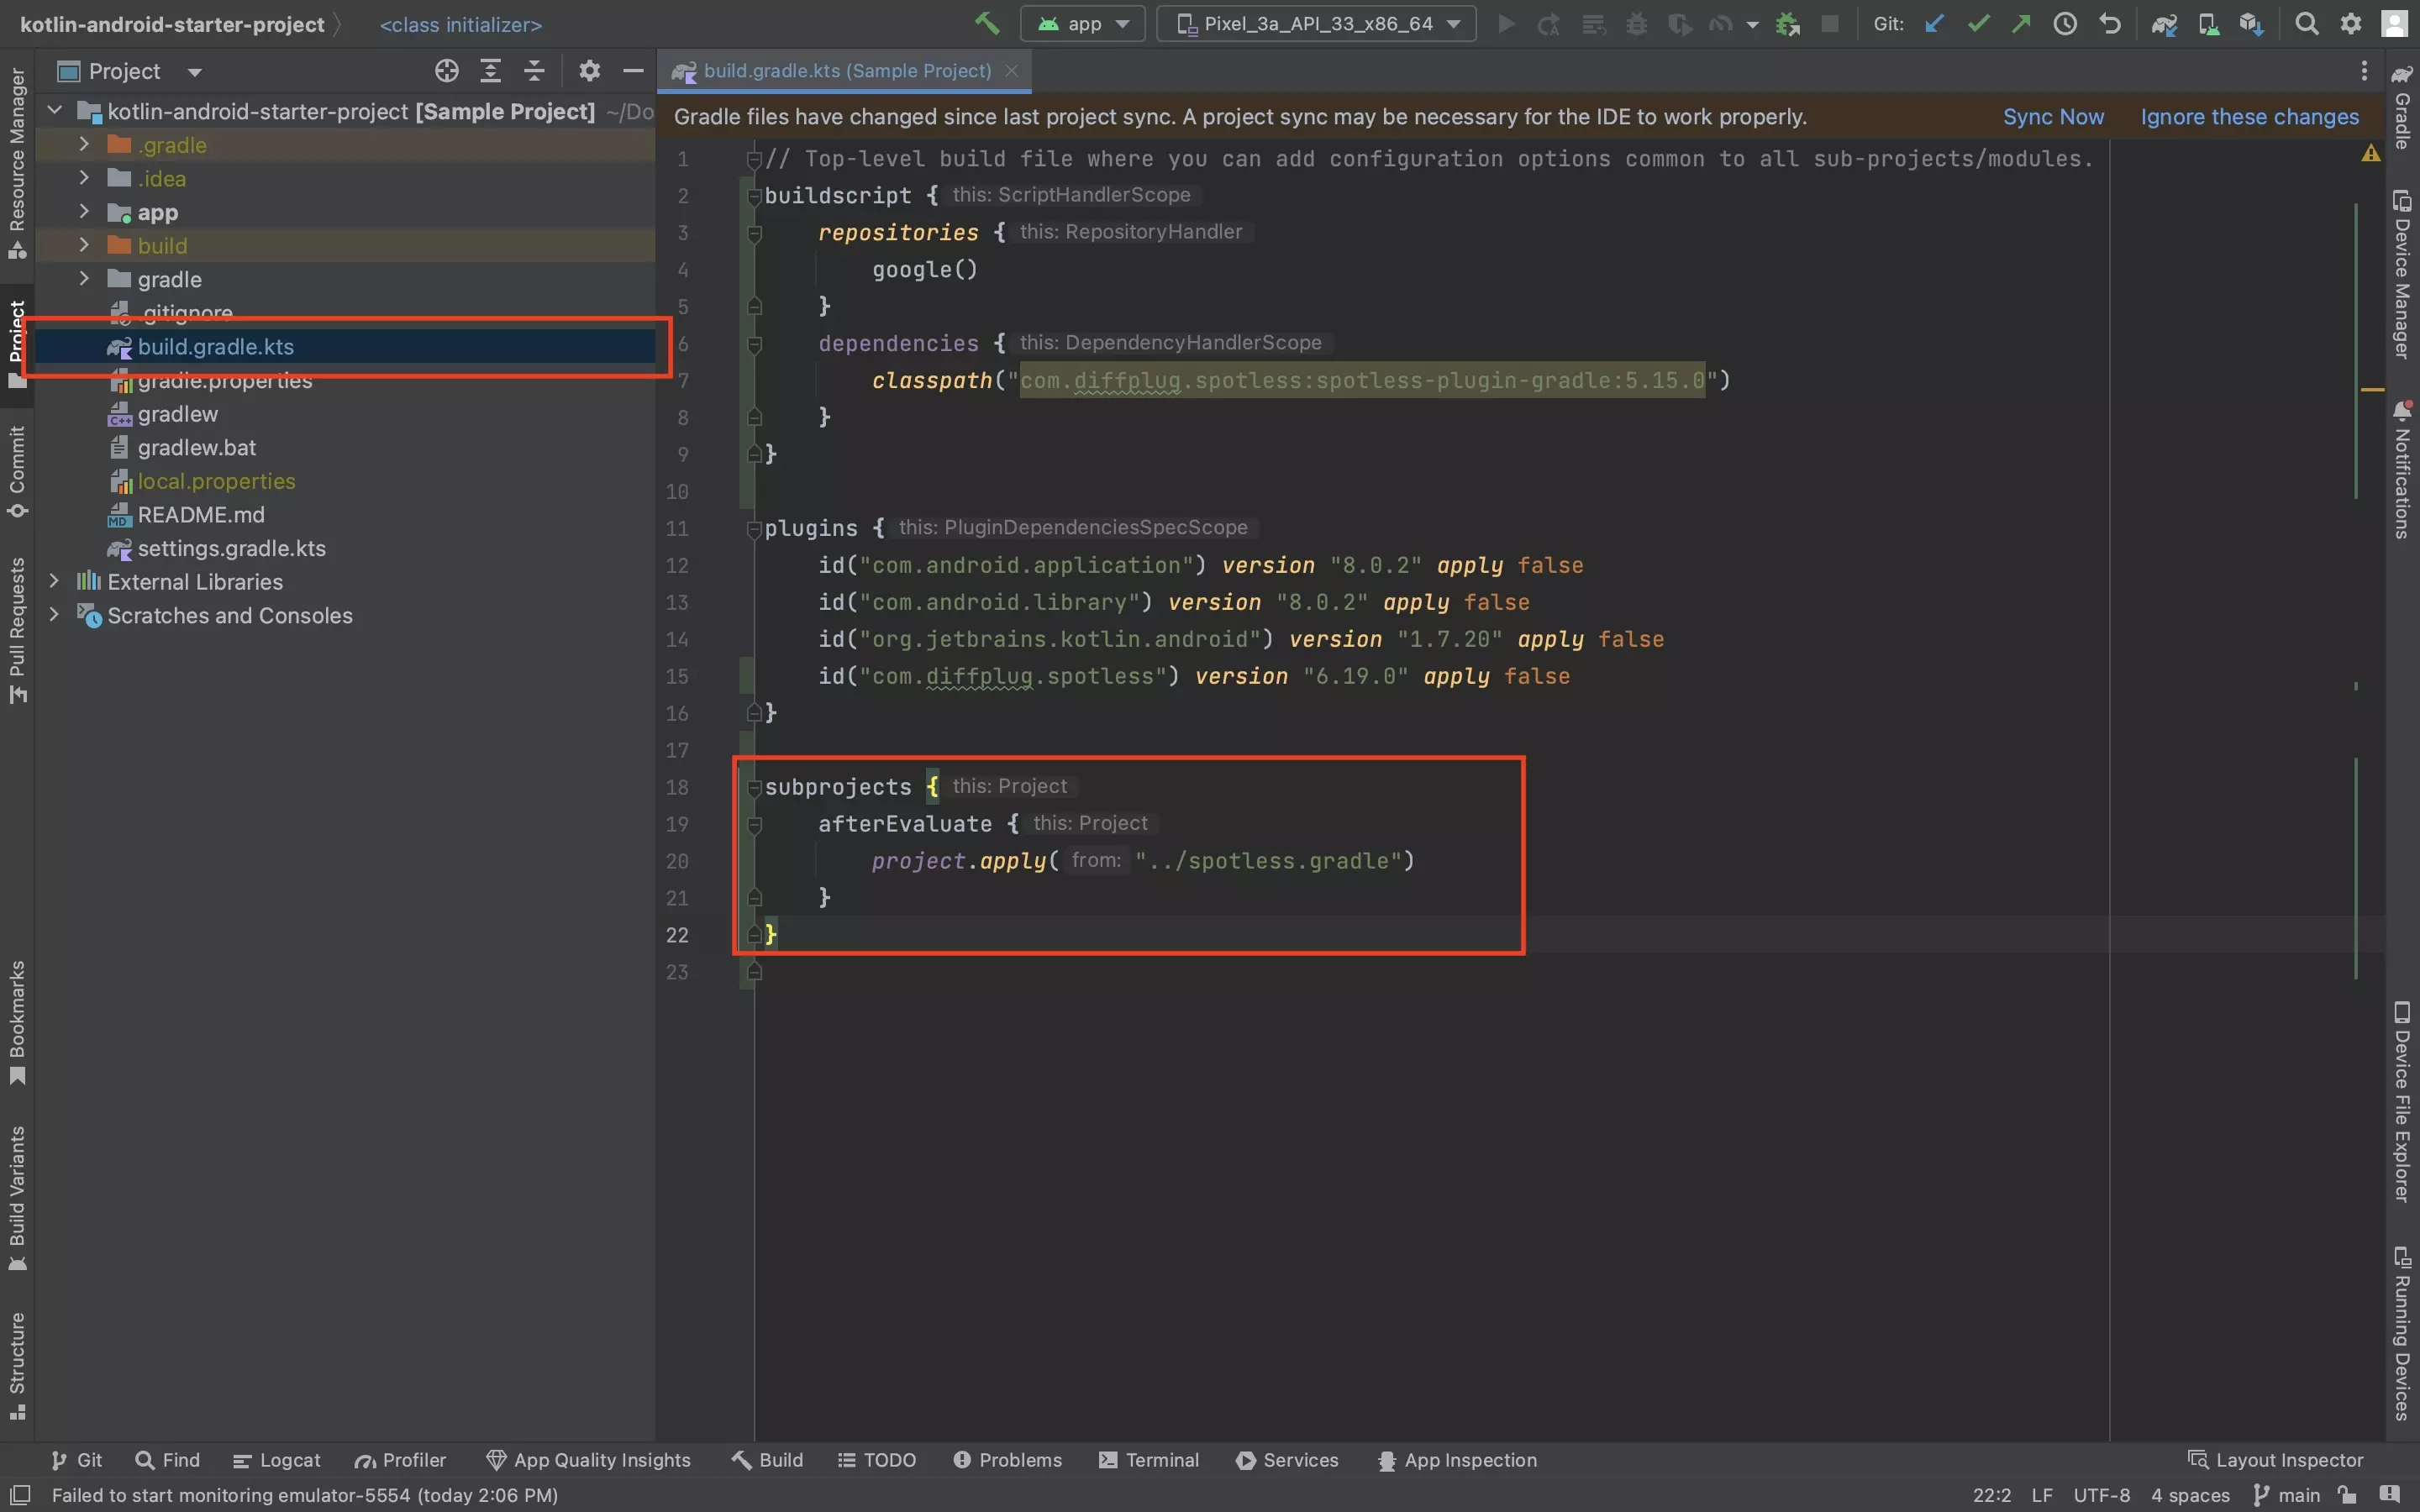 A screenshot of Android Studio showing the build.gradle.kts file. Highlighted is the location of the file and the code that links the project to the spotless gradle which is added in this step.